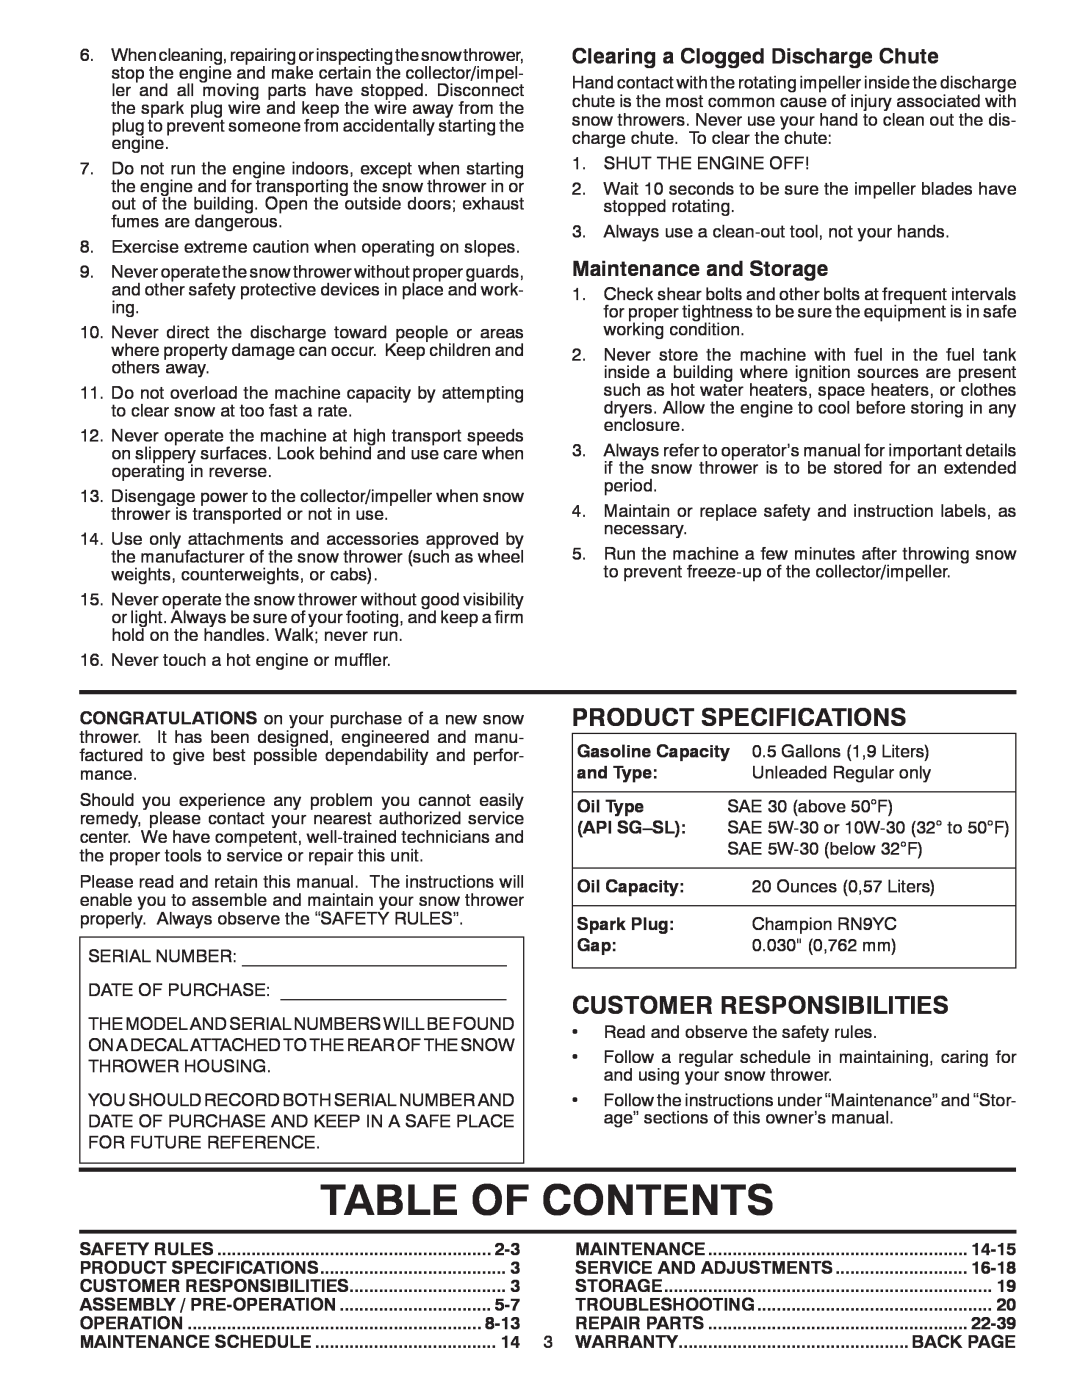 Poulan 428556 Table Of Contents, Product Specifications, Customer Responsibilities, Clearing a Clogged Discharge Chute 